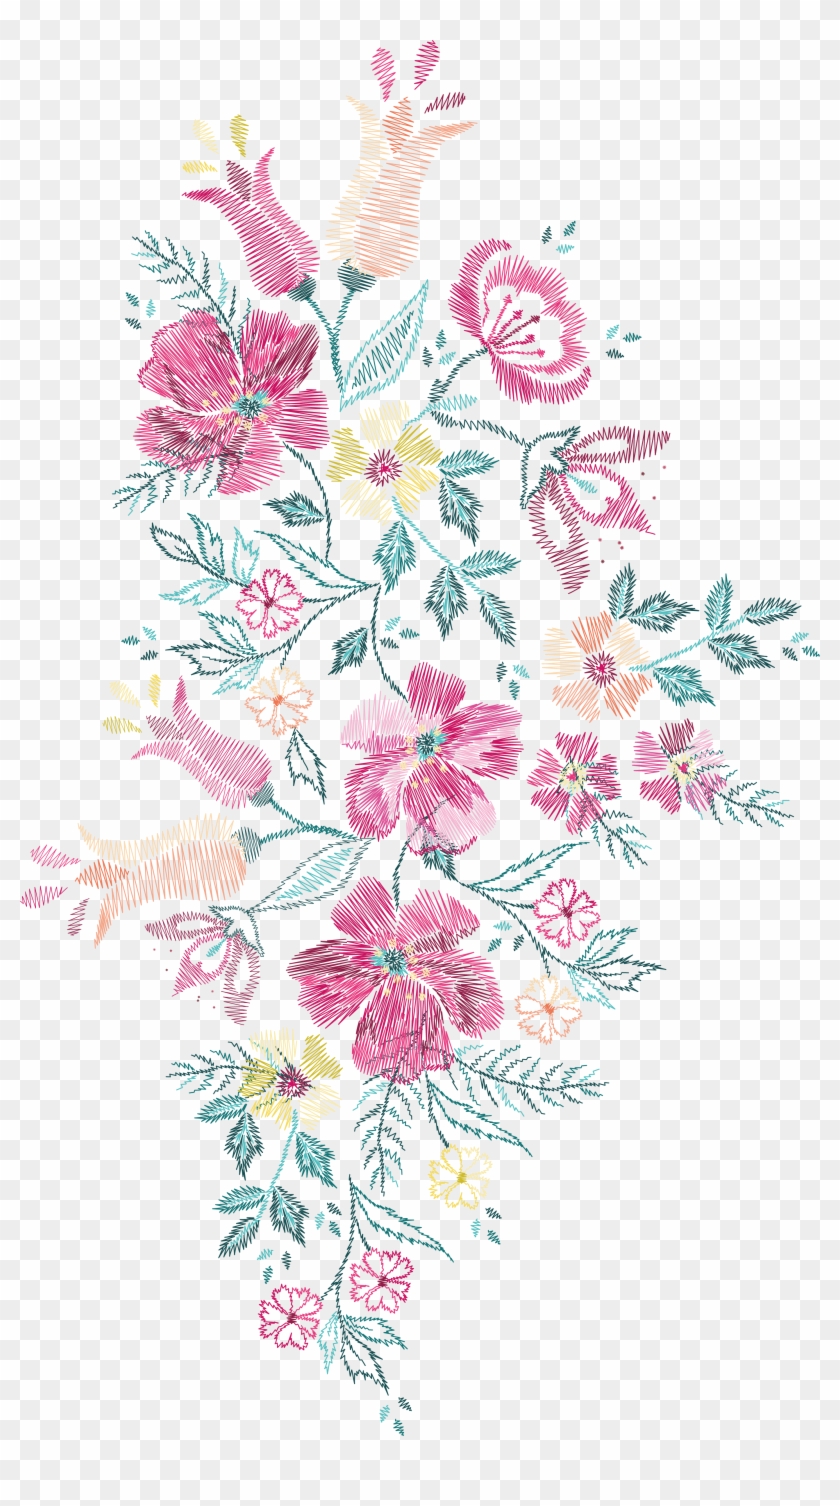 Flower Embroidery Euclidean Vector Floral Design - Flower Embroidery Png #299566